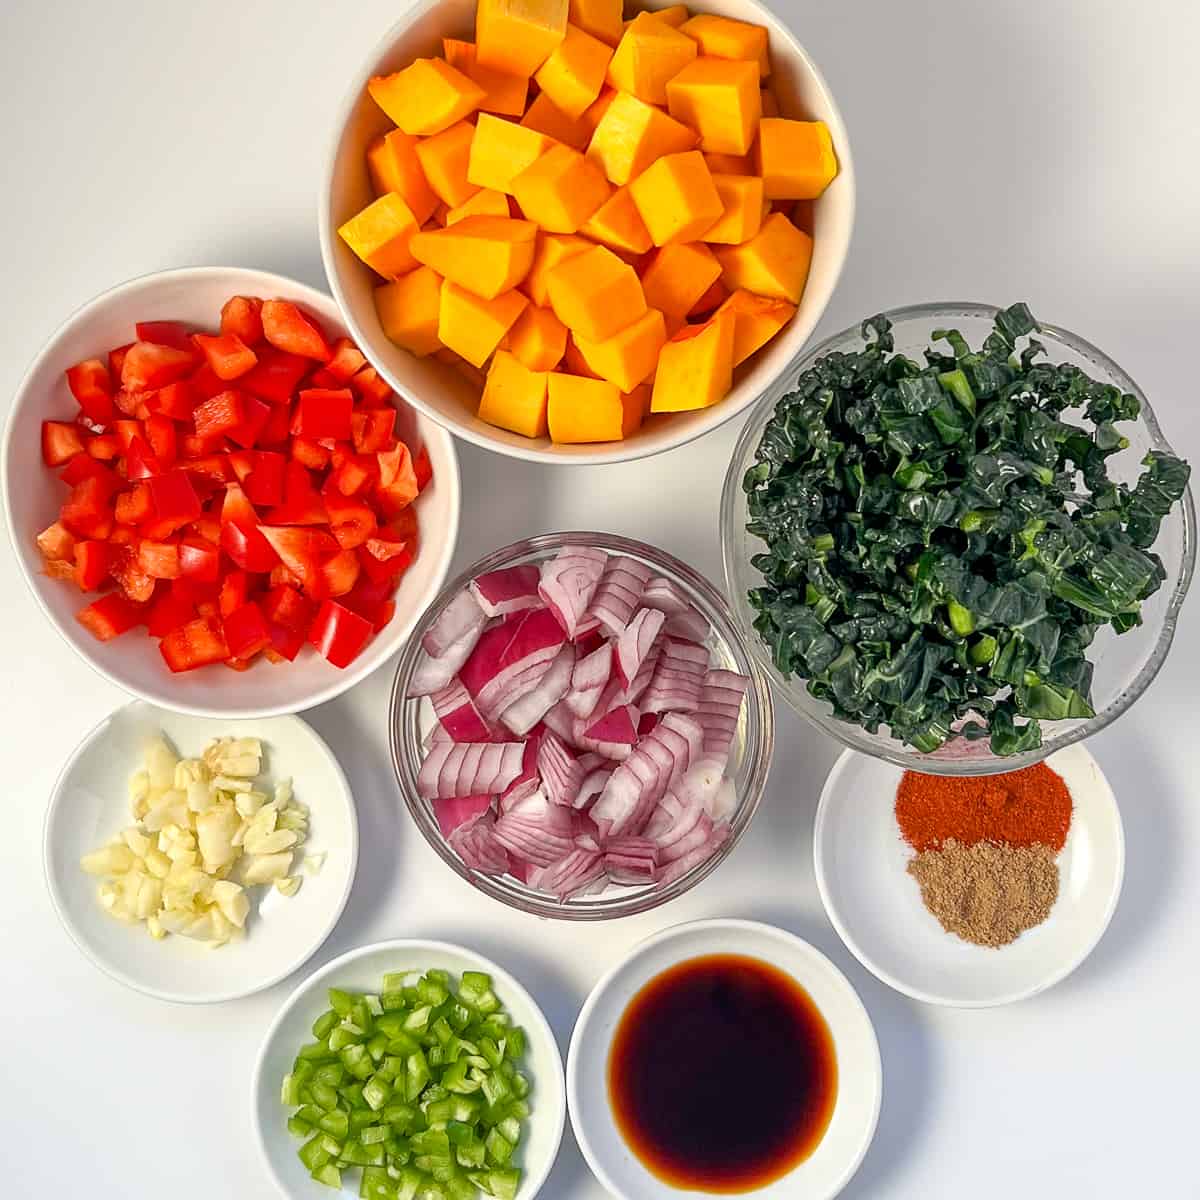 ingredients for butternut squash breakfast hash: cubed butternut squash, chopped onion, bell pepper, kale and other spices